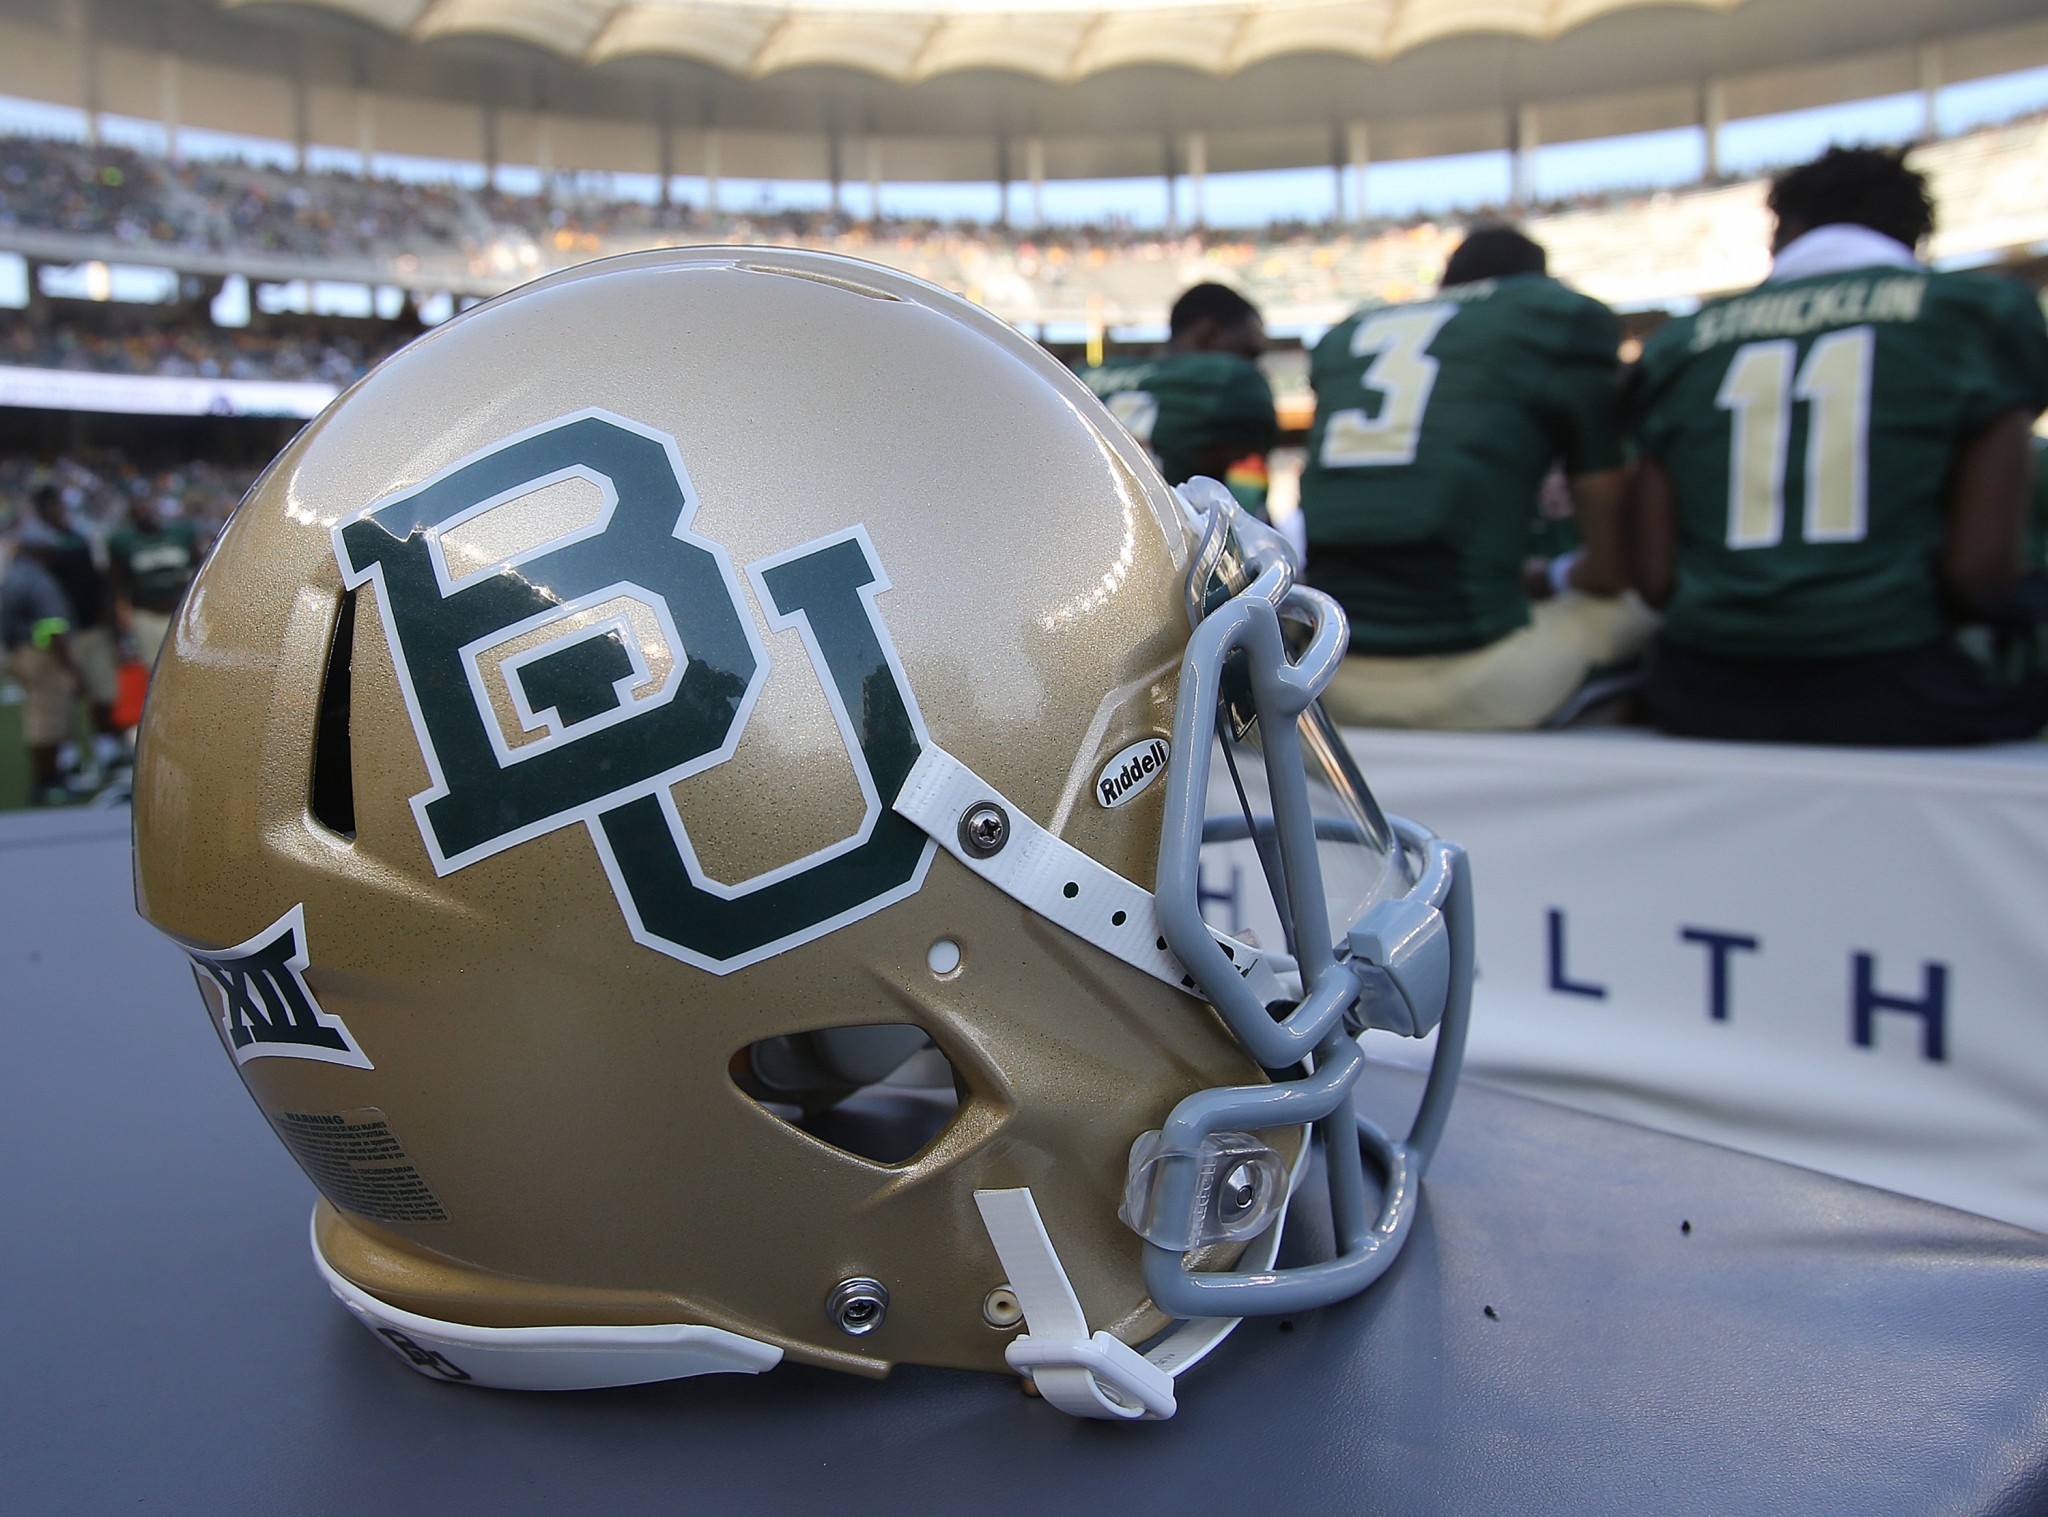 Baylor football helmet on the sidelines during their game with Rice at an NCAA college football game, Saturday, Sept. 26, 2015, in Waco, Texas. (AP Photo/Rod Aydelotte)